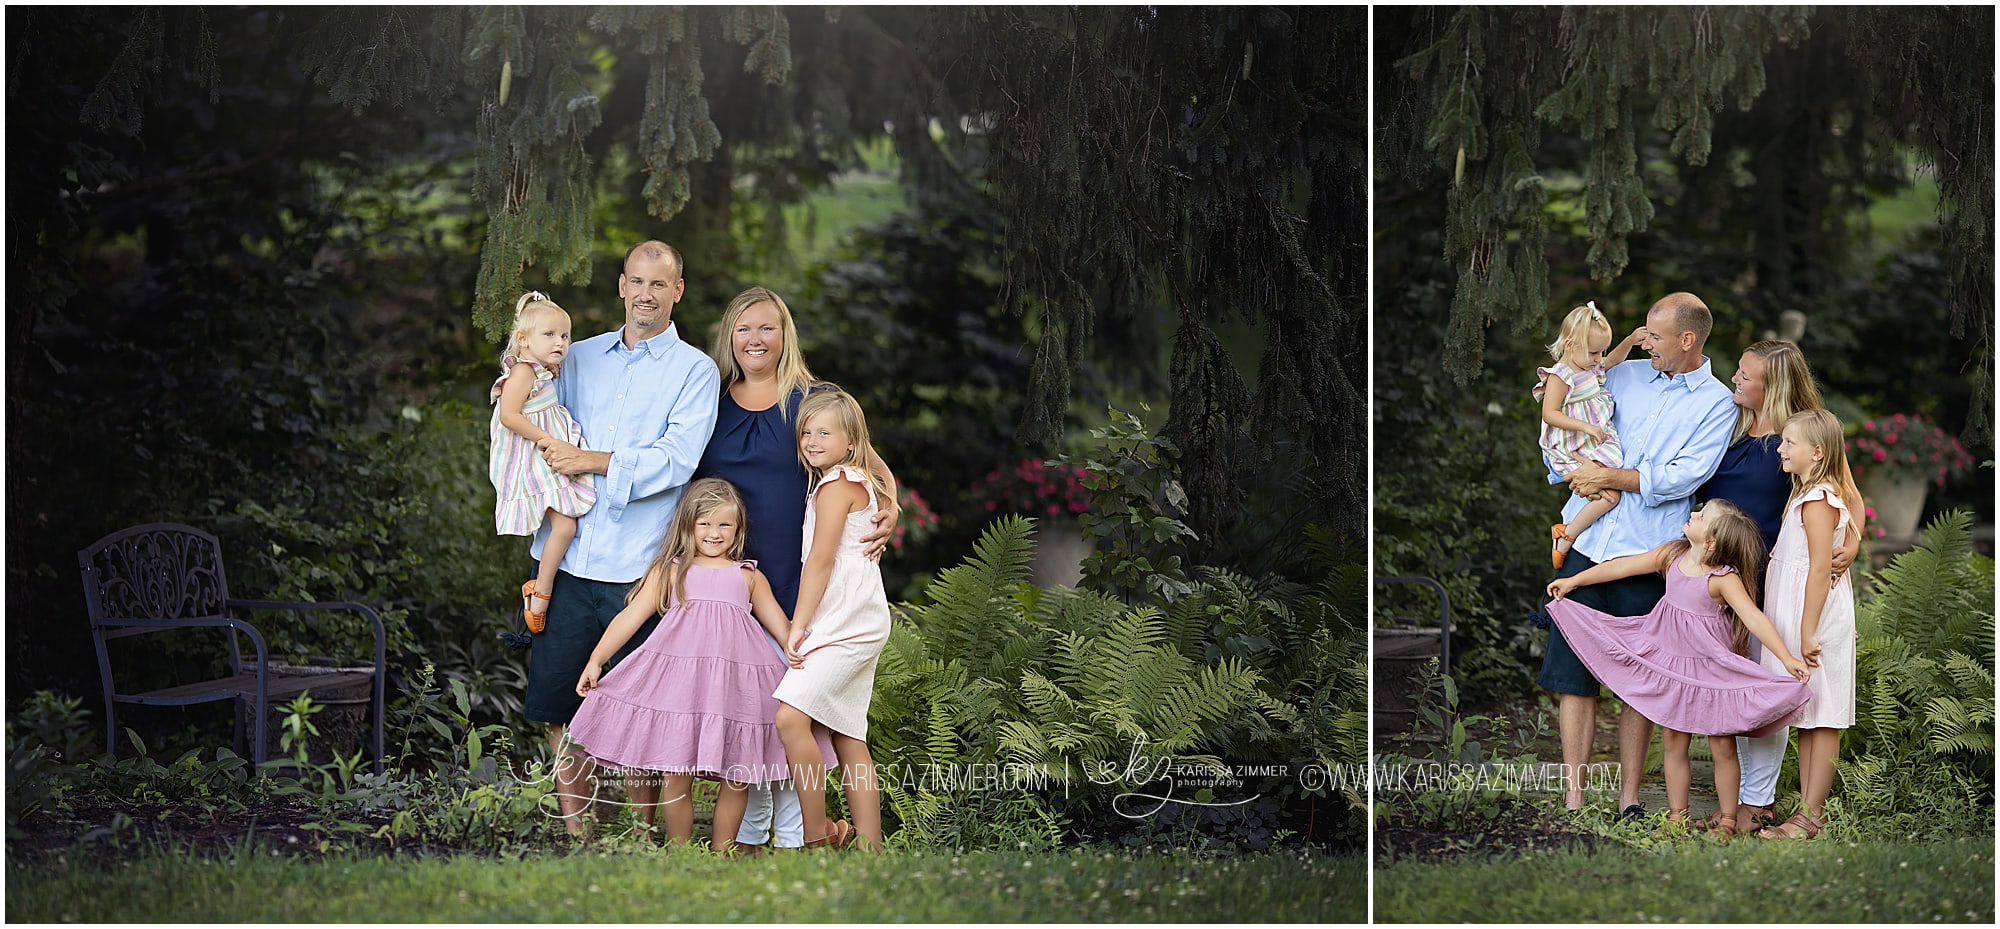 Outdoor Family Photography session at The Peter Allen House near Harrisburg PA